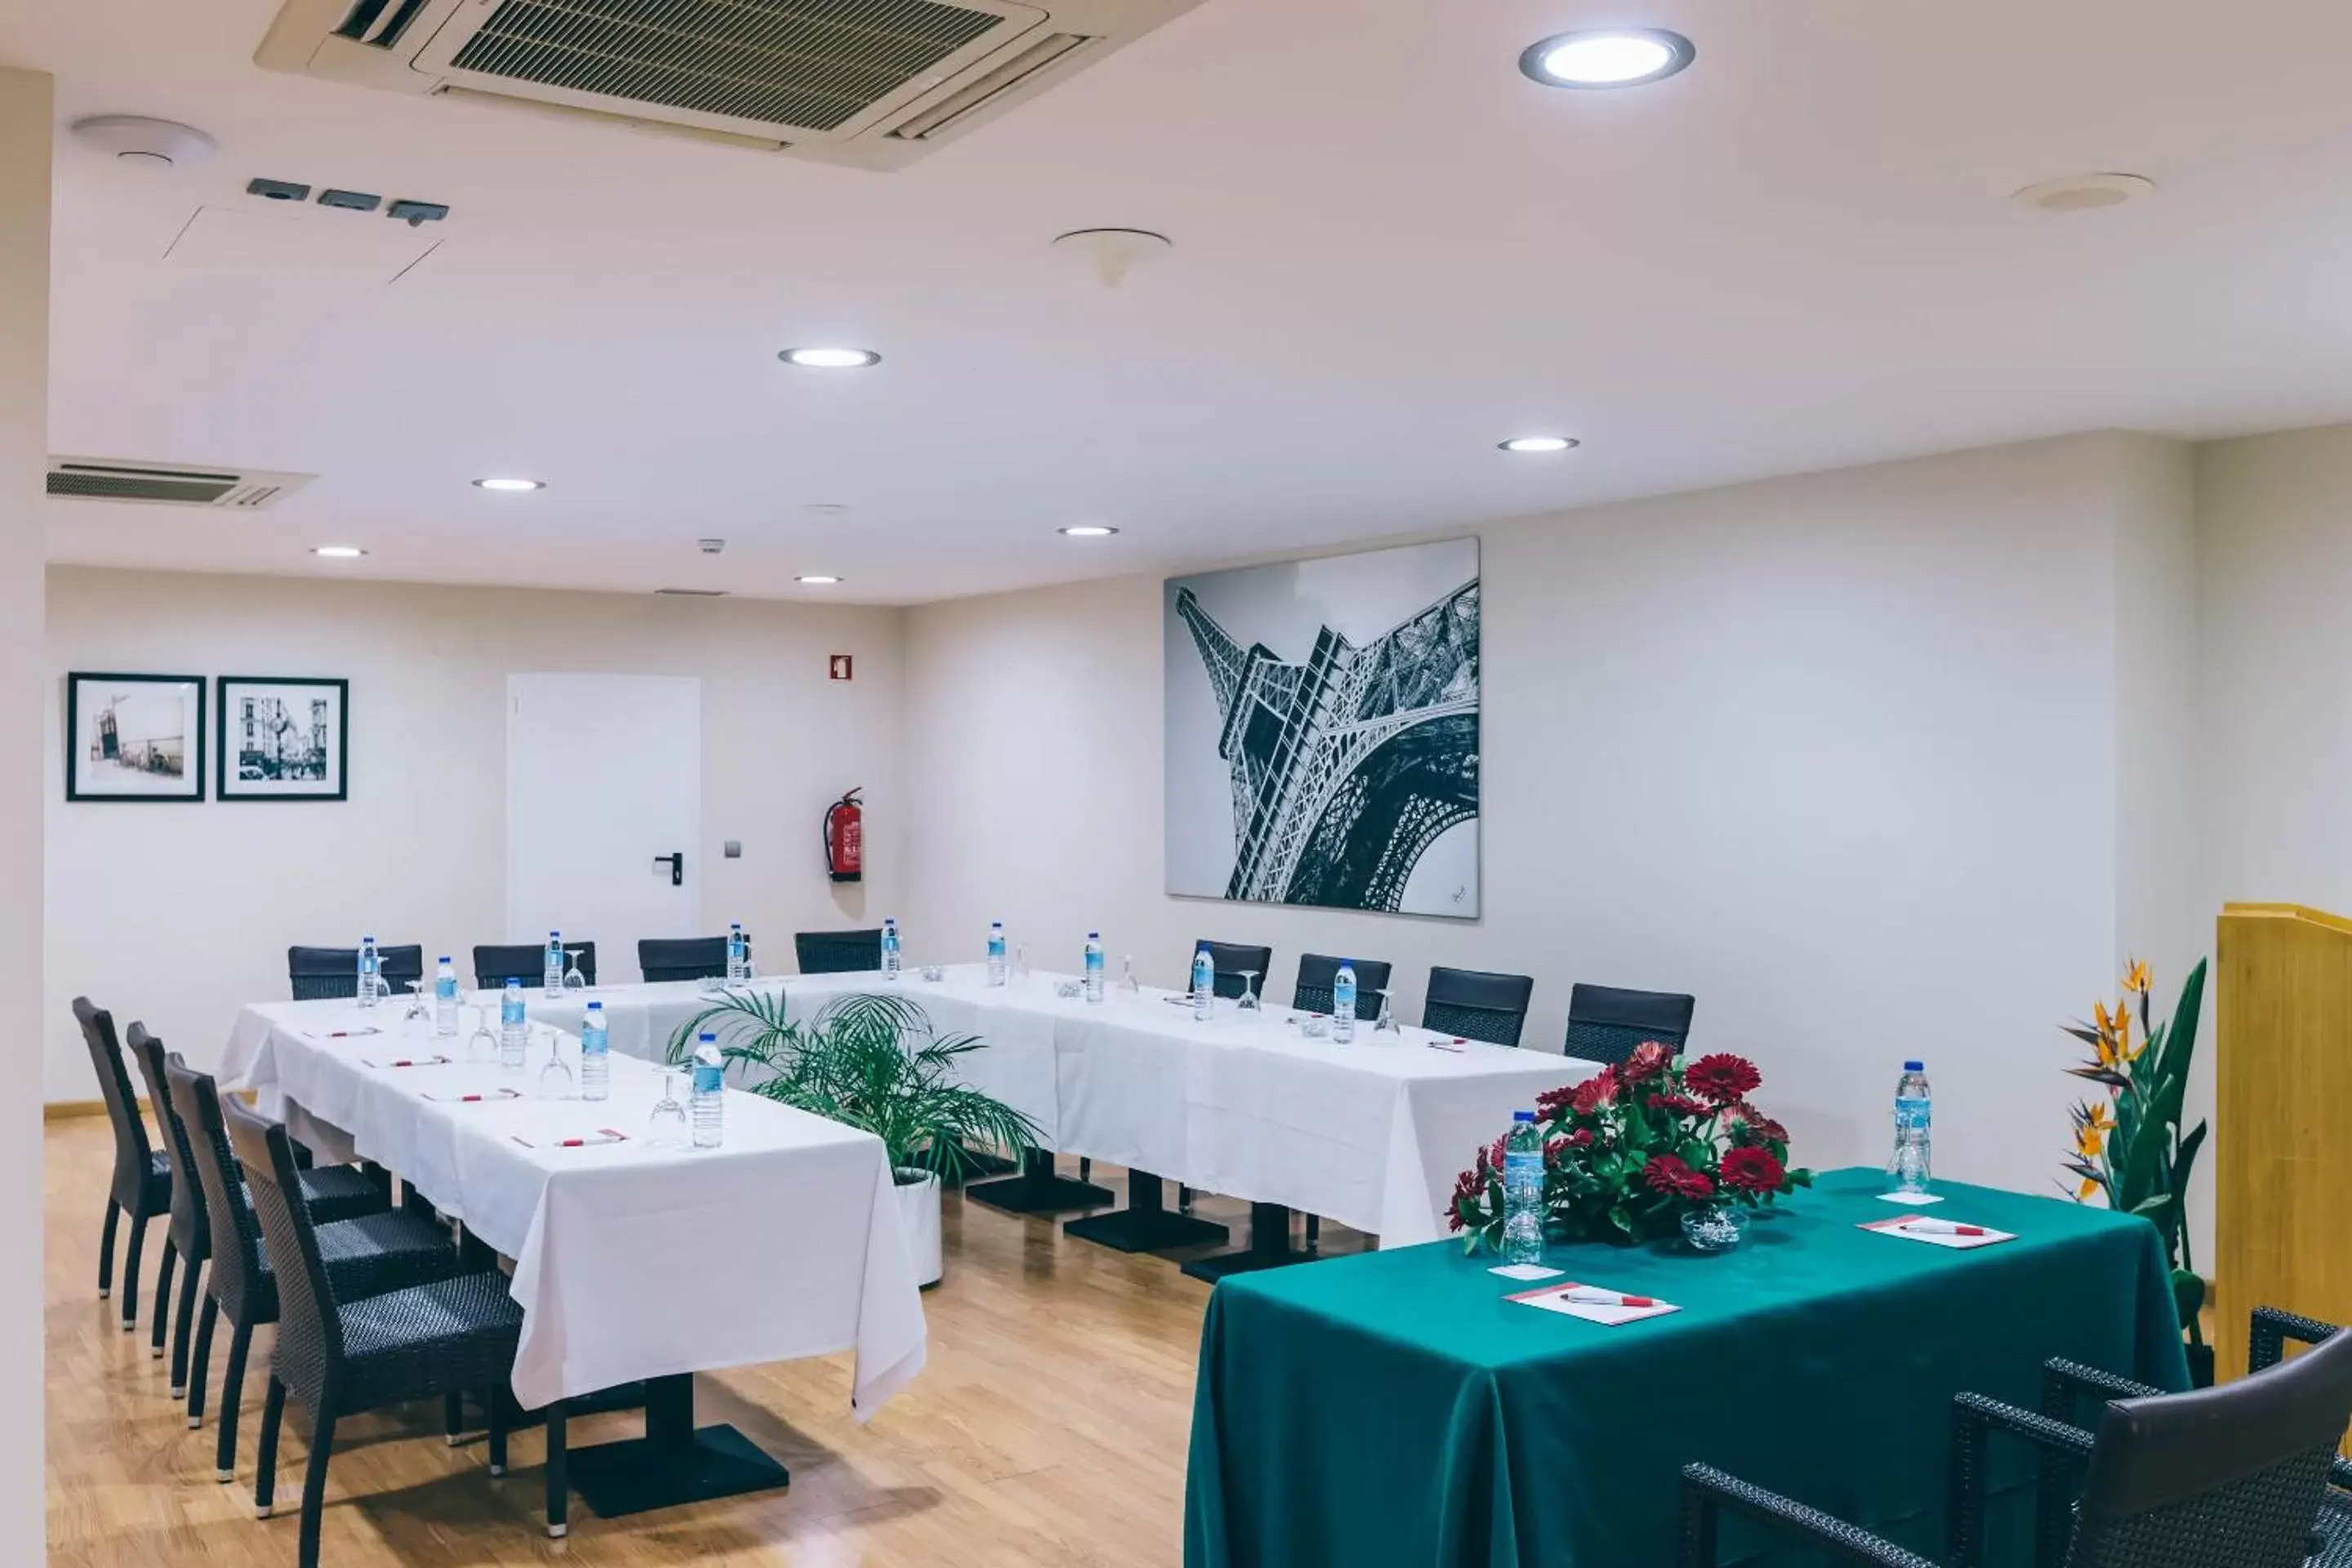 Meeting/conference room in Muthu Raga Madeira Hotel